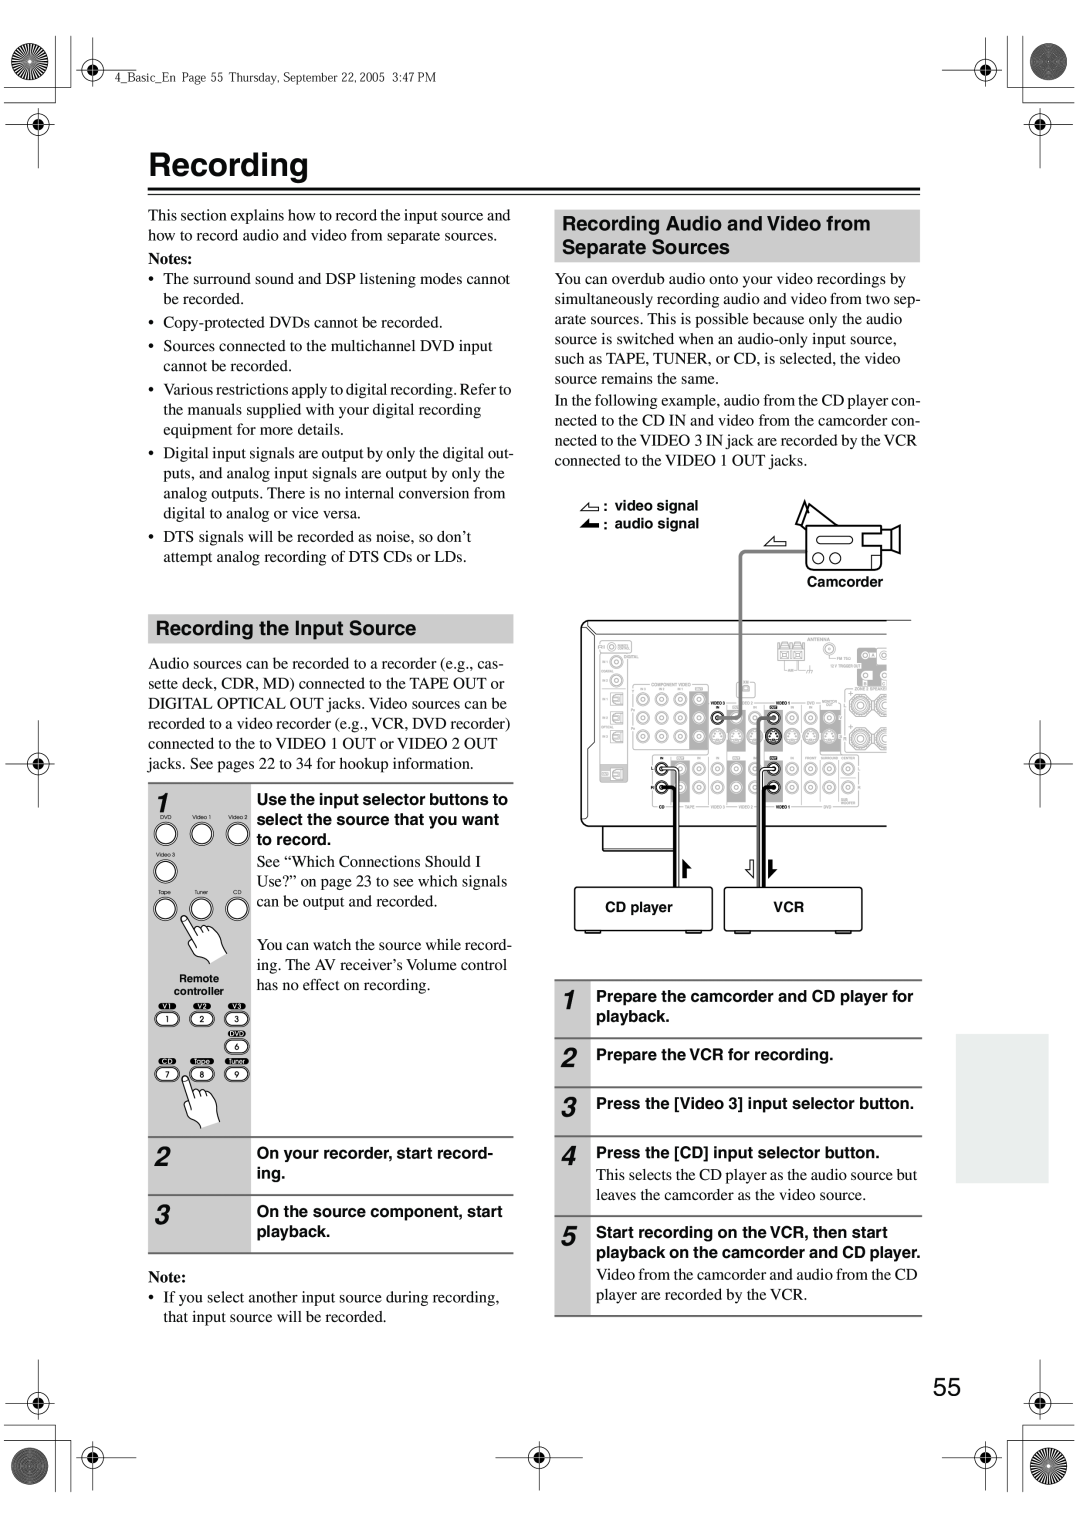 Integra DTR-4.6 instruction manual Recording Audio and Video from Separate Sources, Recording the Input Source, Notes 